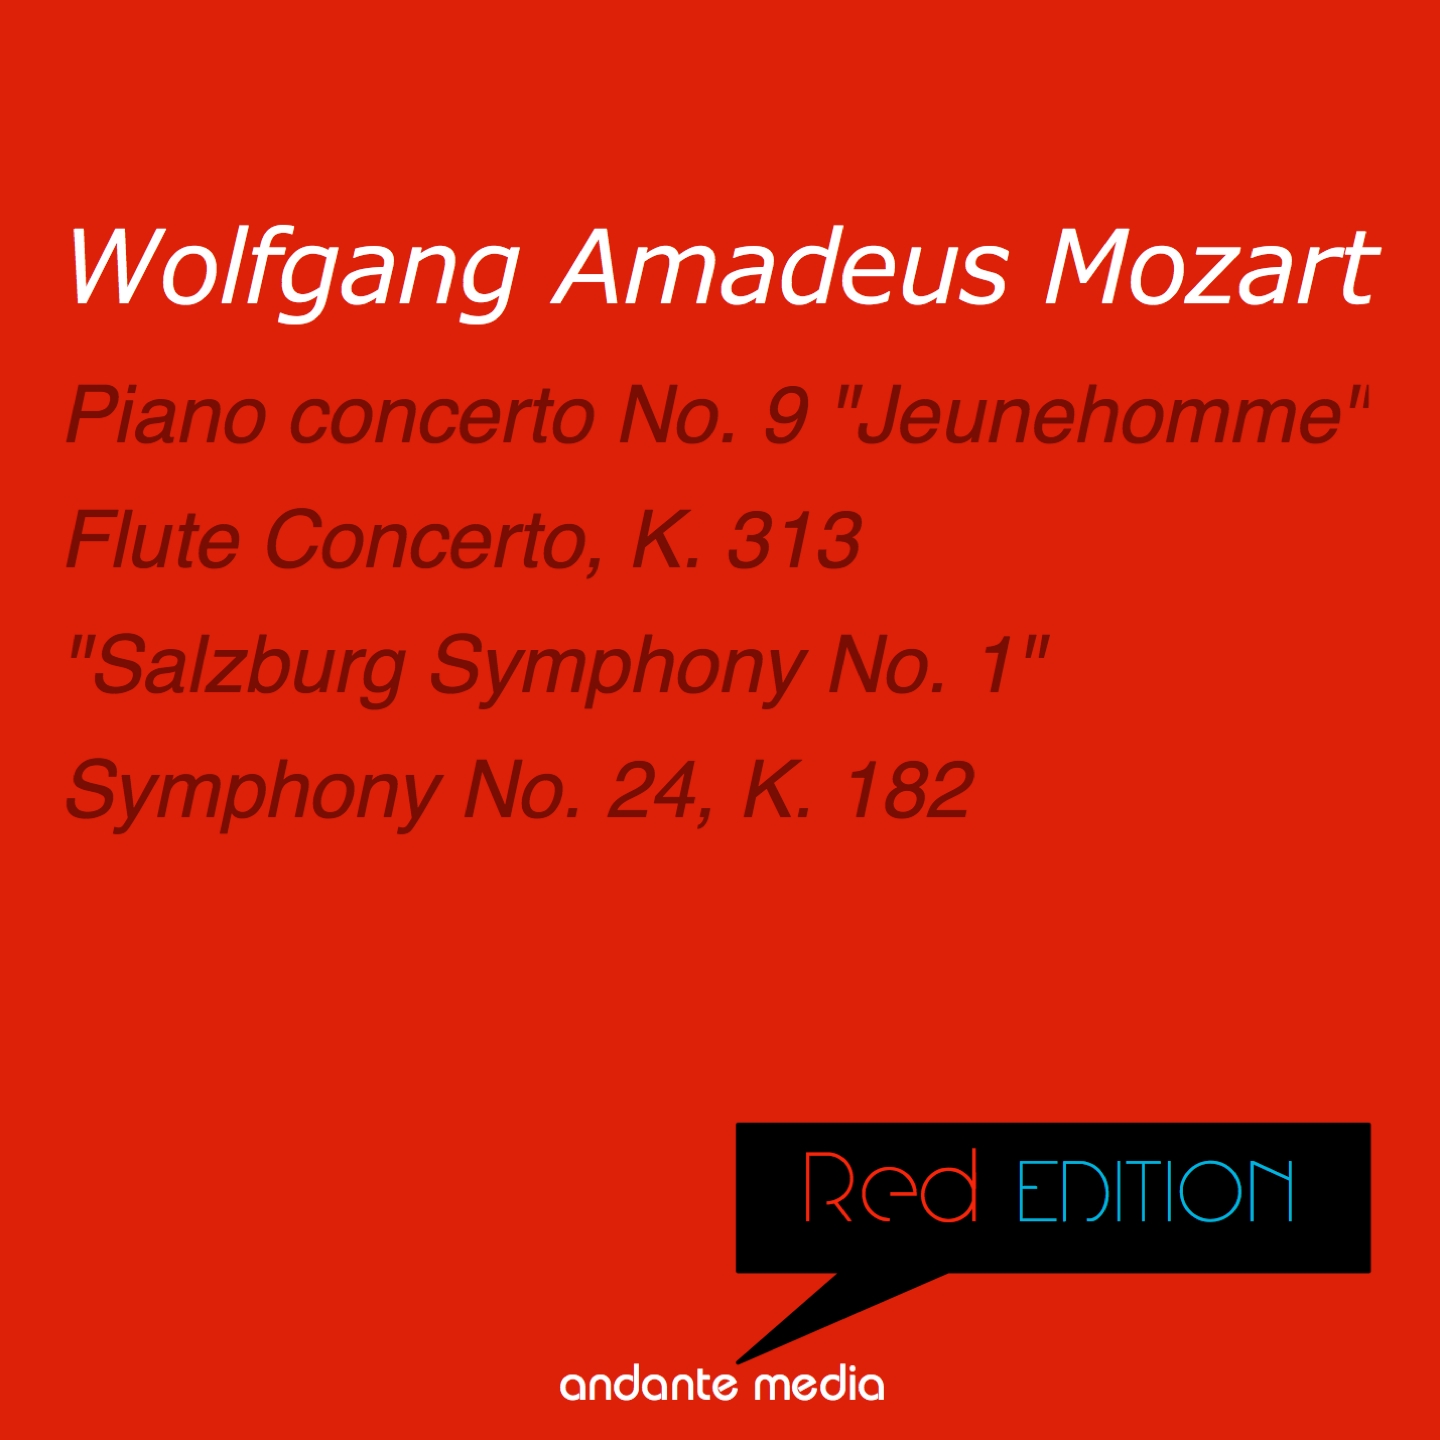 Red Edition - Mozart: Piano Concerto No. 9, K. 271 "Jeunehomme"